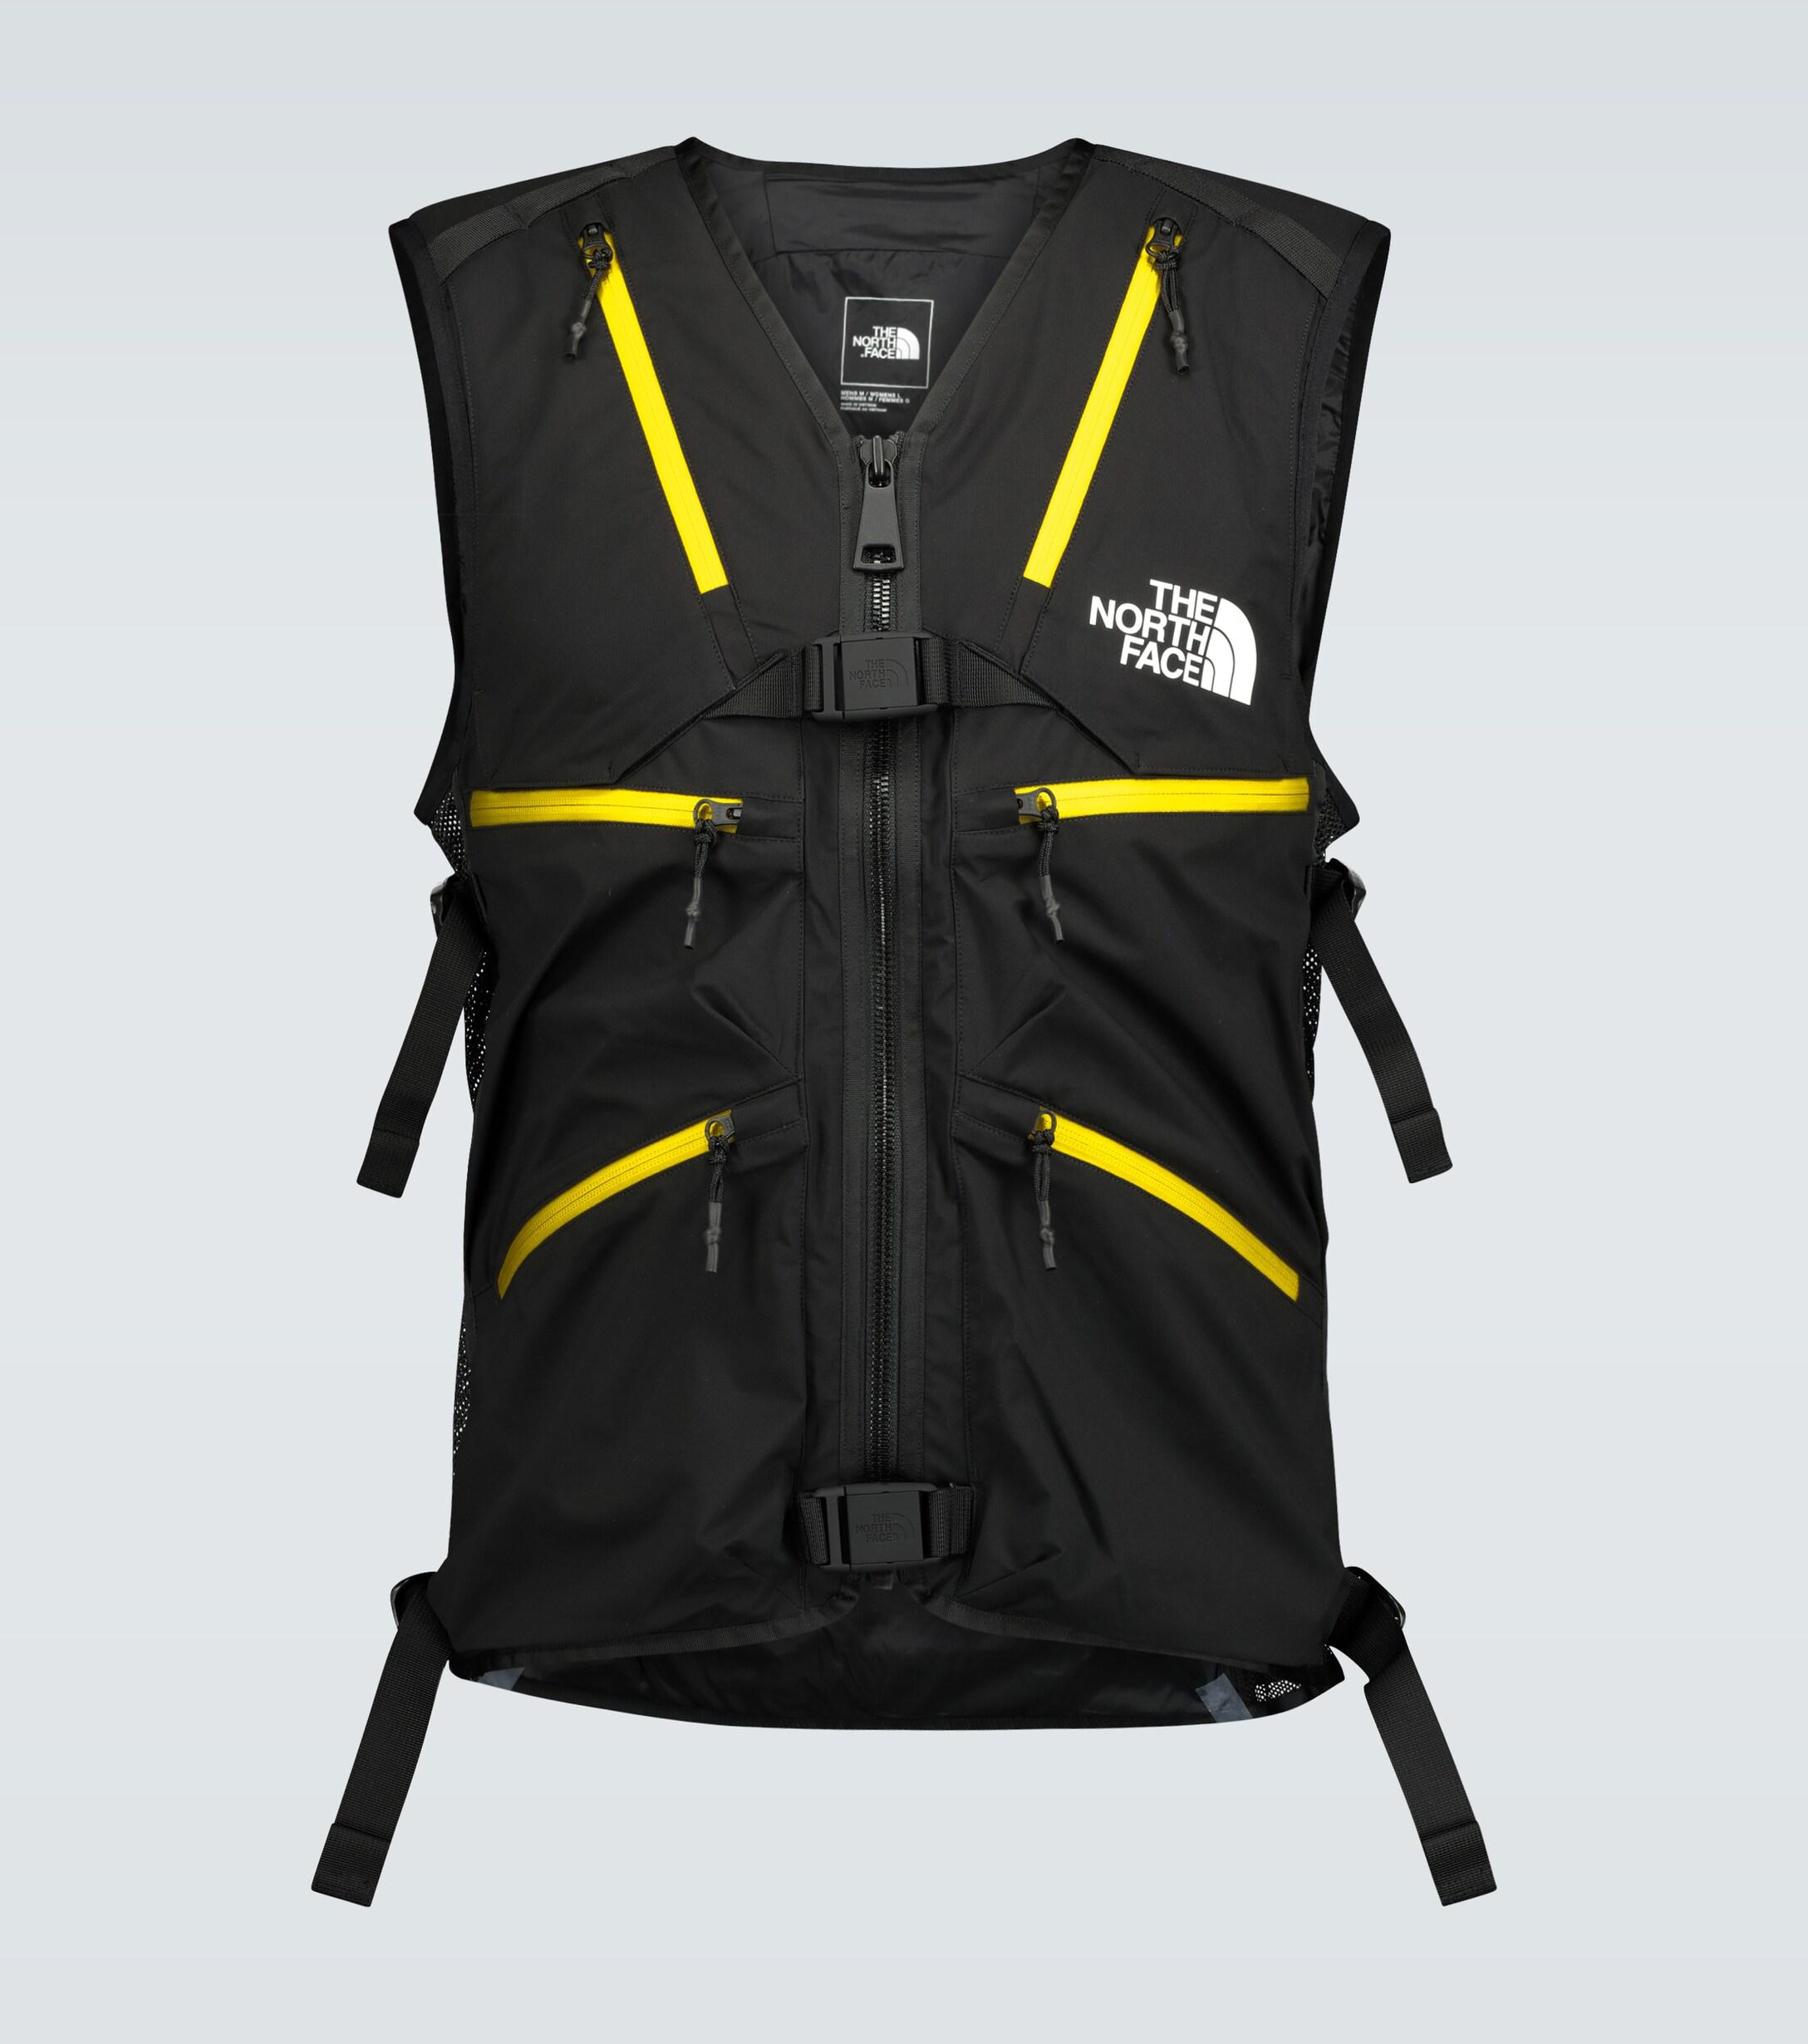 THE NORTH FACE BLACK SERIES Abs Technical Vest in Black for Men - Lyst